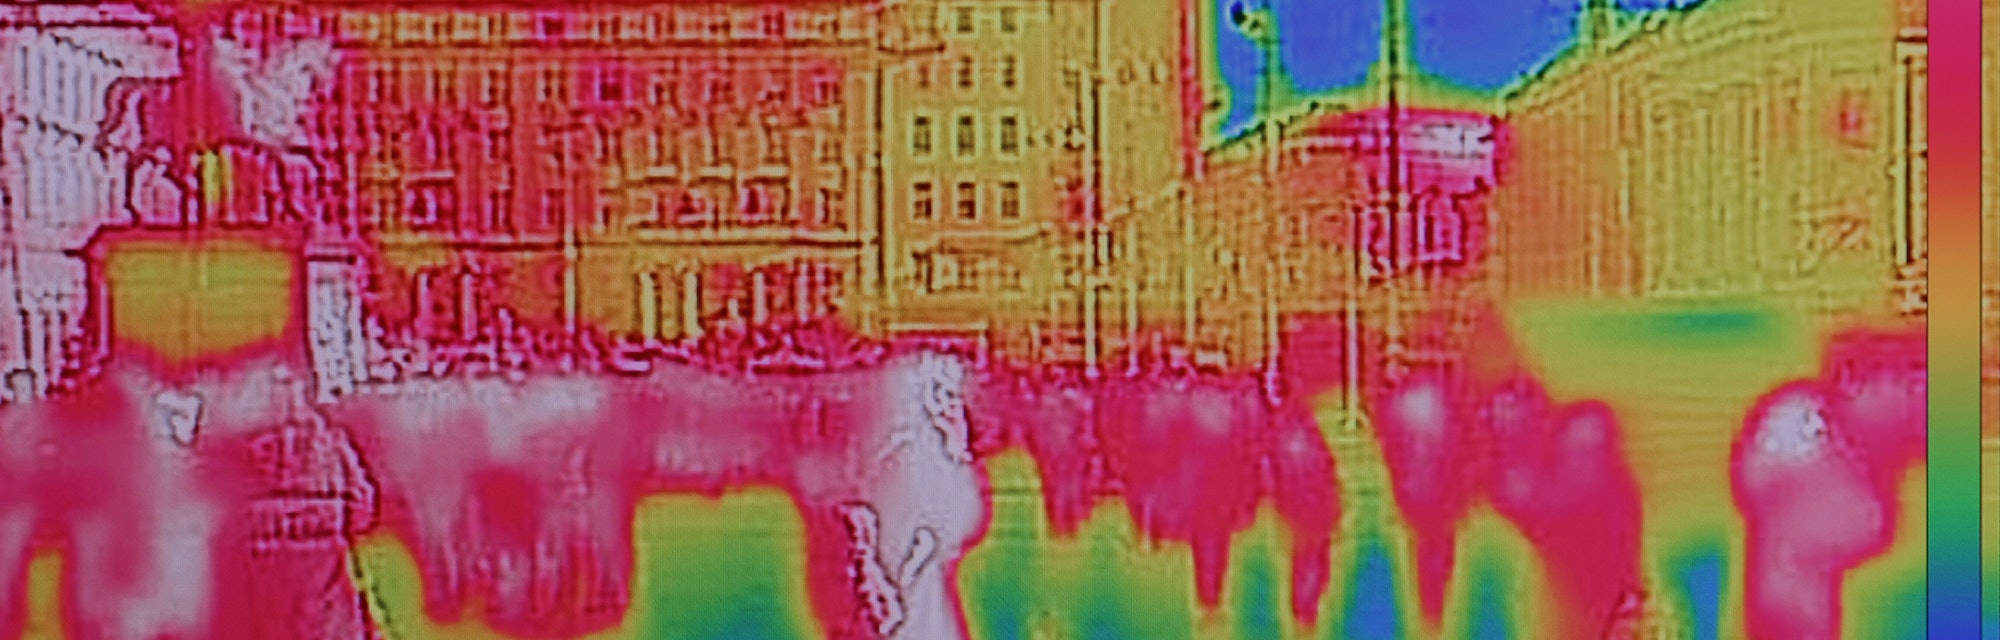 Infrared Thermal image of people walking the city streets, on a cold winter day